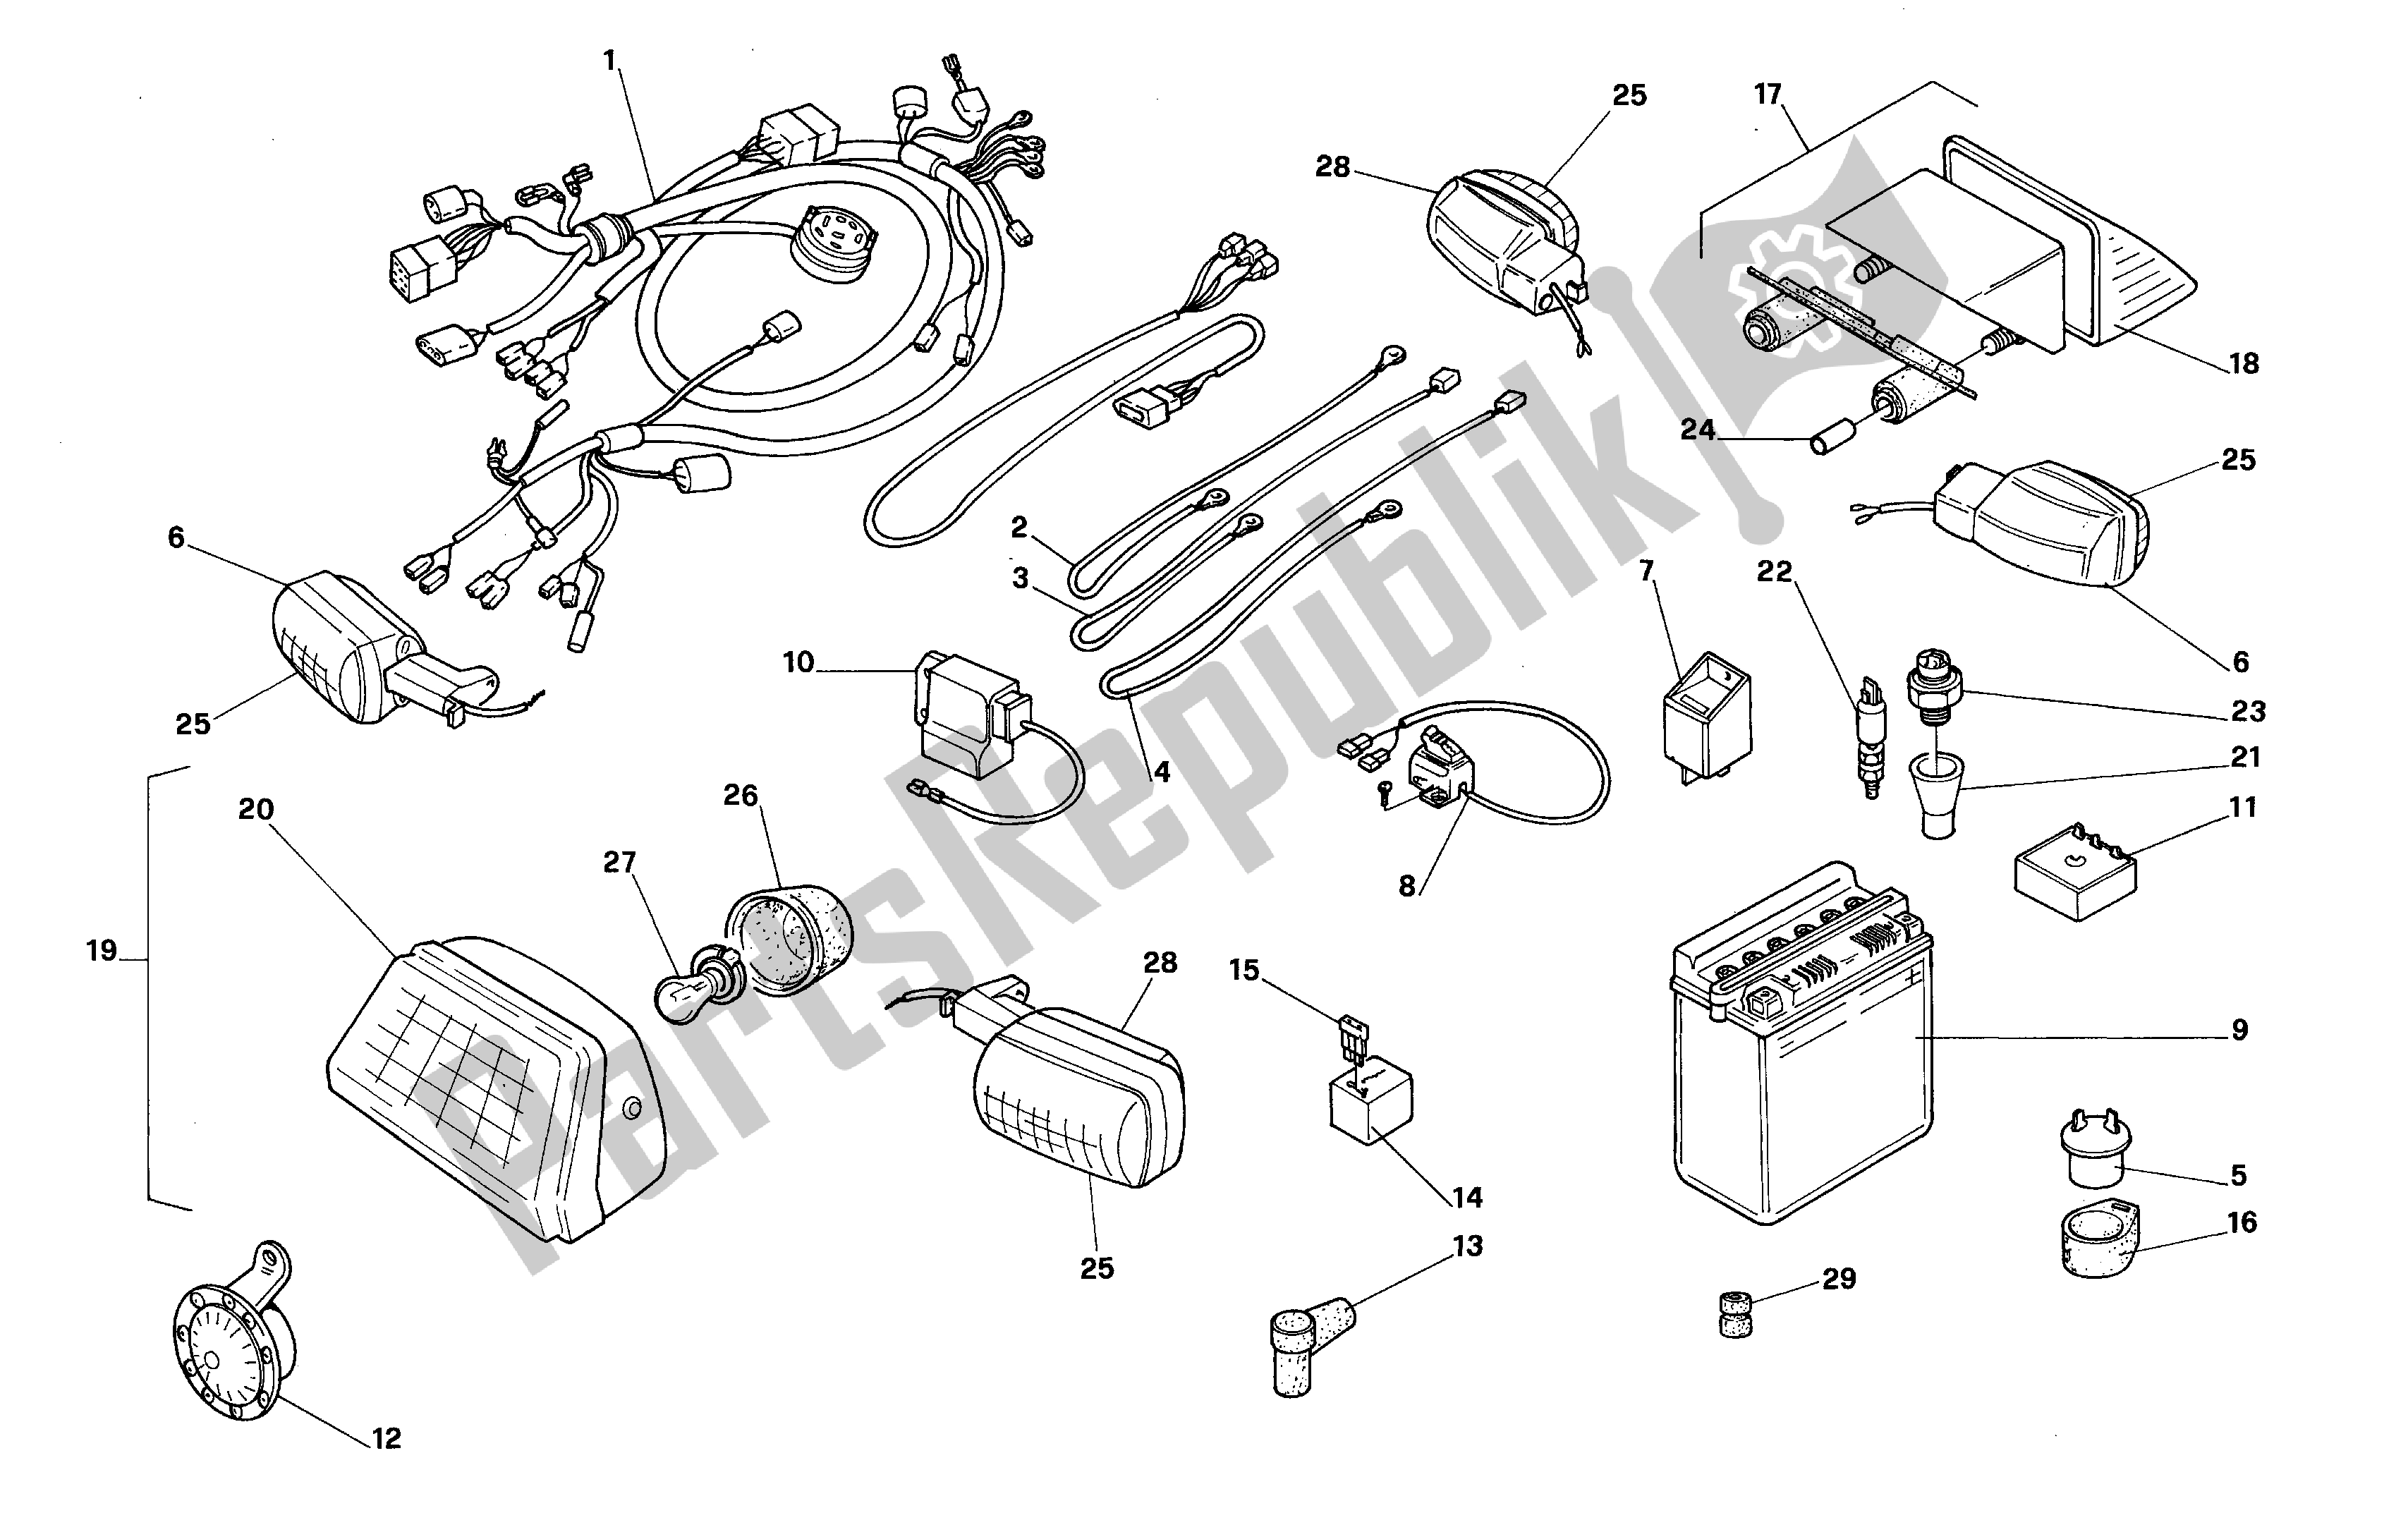 All parts for the Electrical System of the Aprilia RX 50 1990